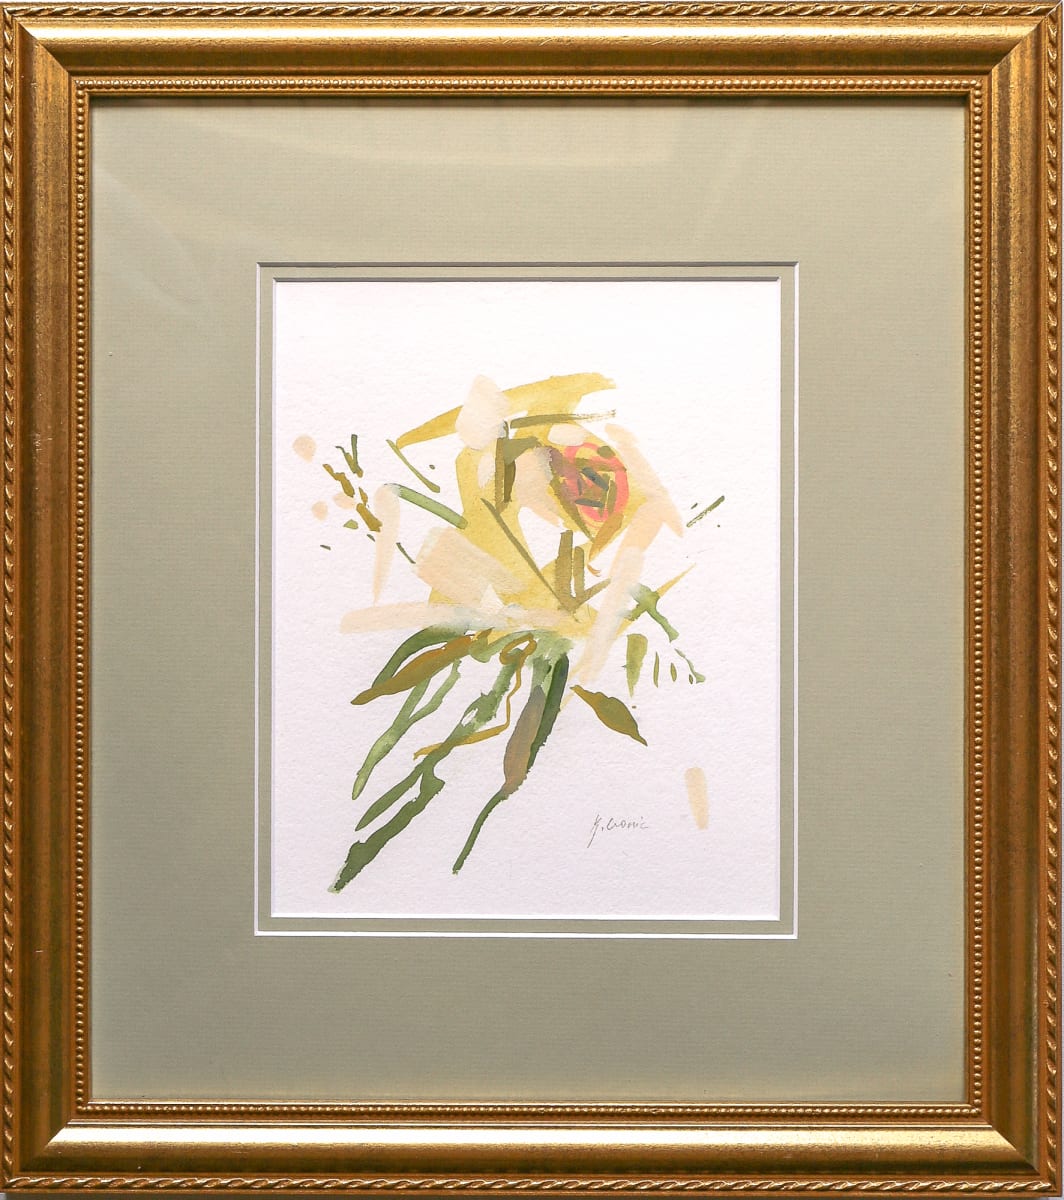 Soft_and_Sweet_2_8x10_framed_to_16x18_Kristin_Cronic_325_ywotpk_3 by Kristin  Cronic 